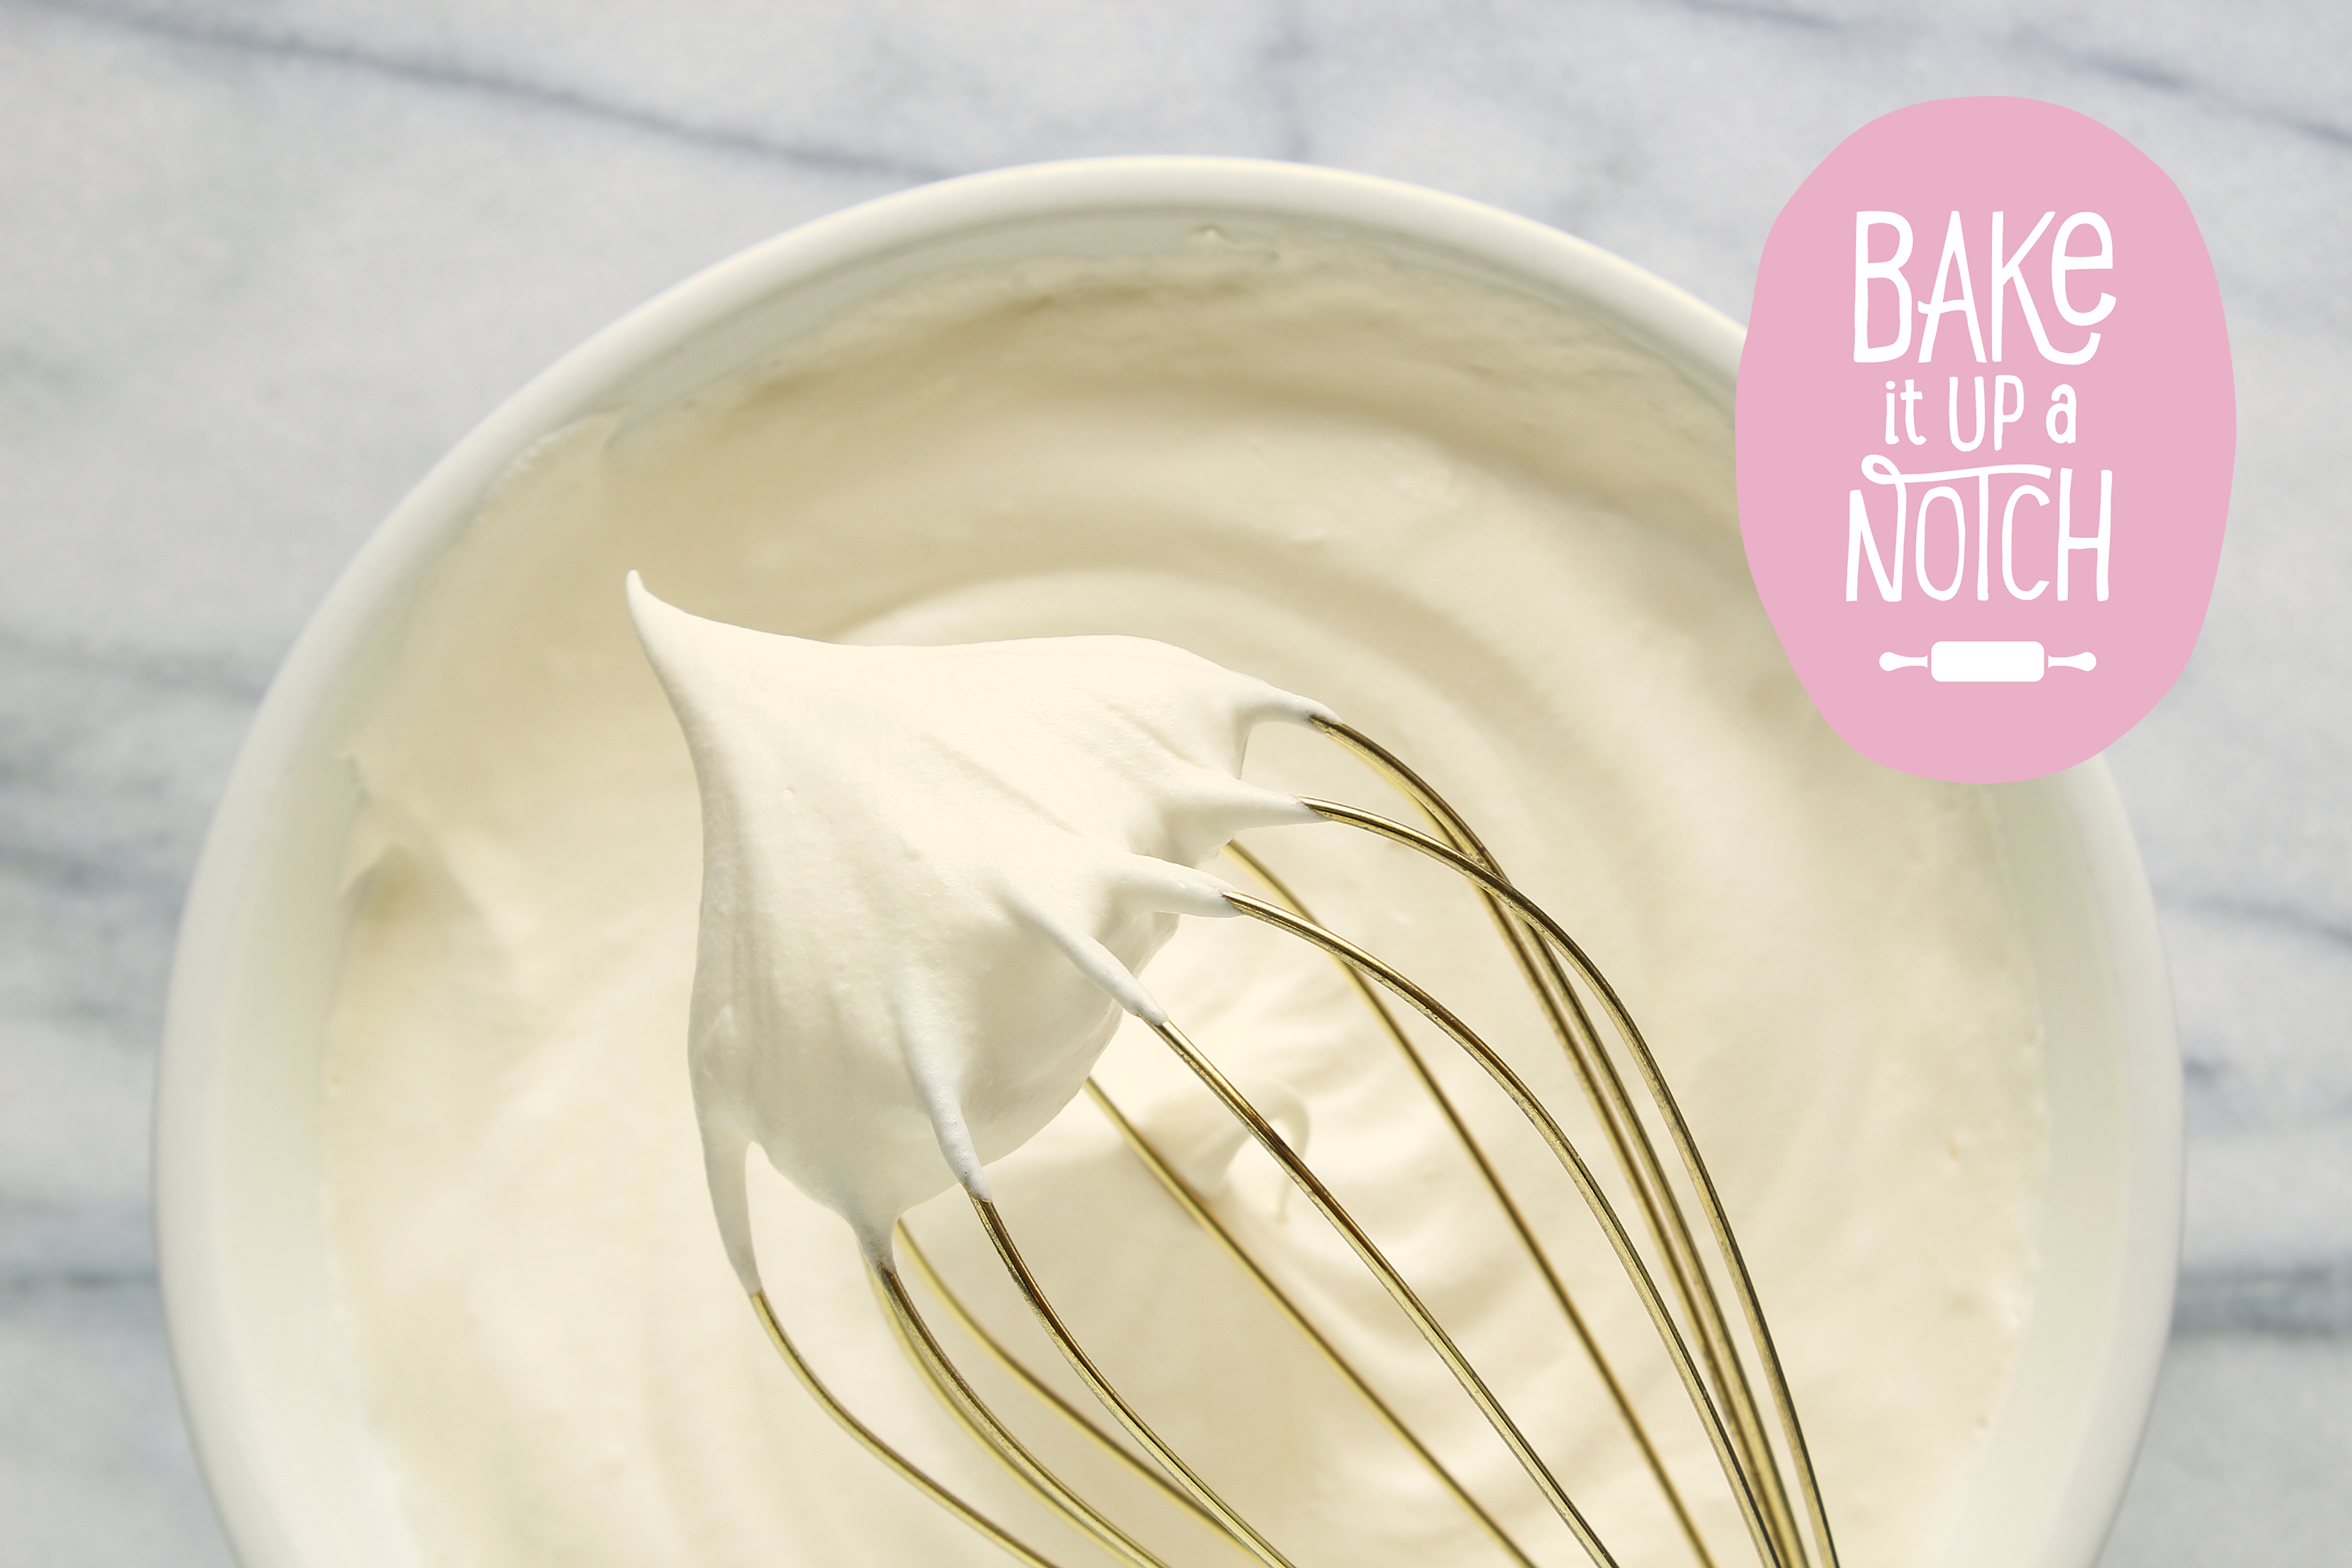 You Can Turn Basic Whipped Cream Into the Best Cake Frosting with